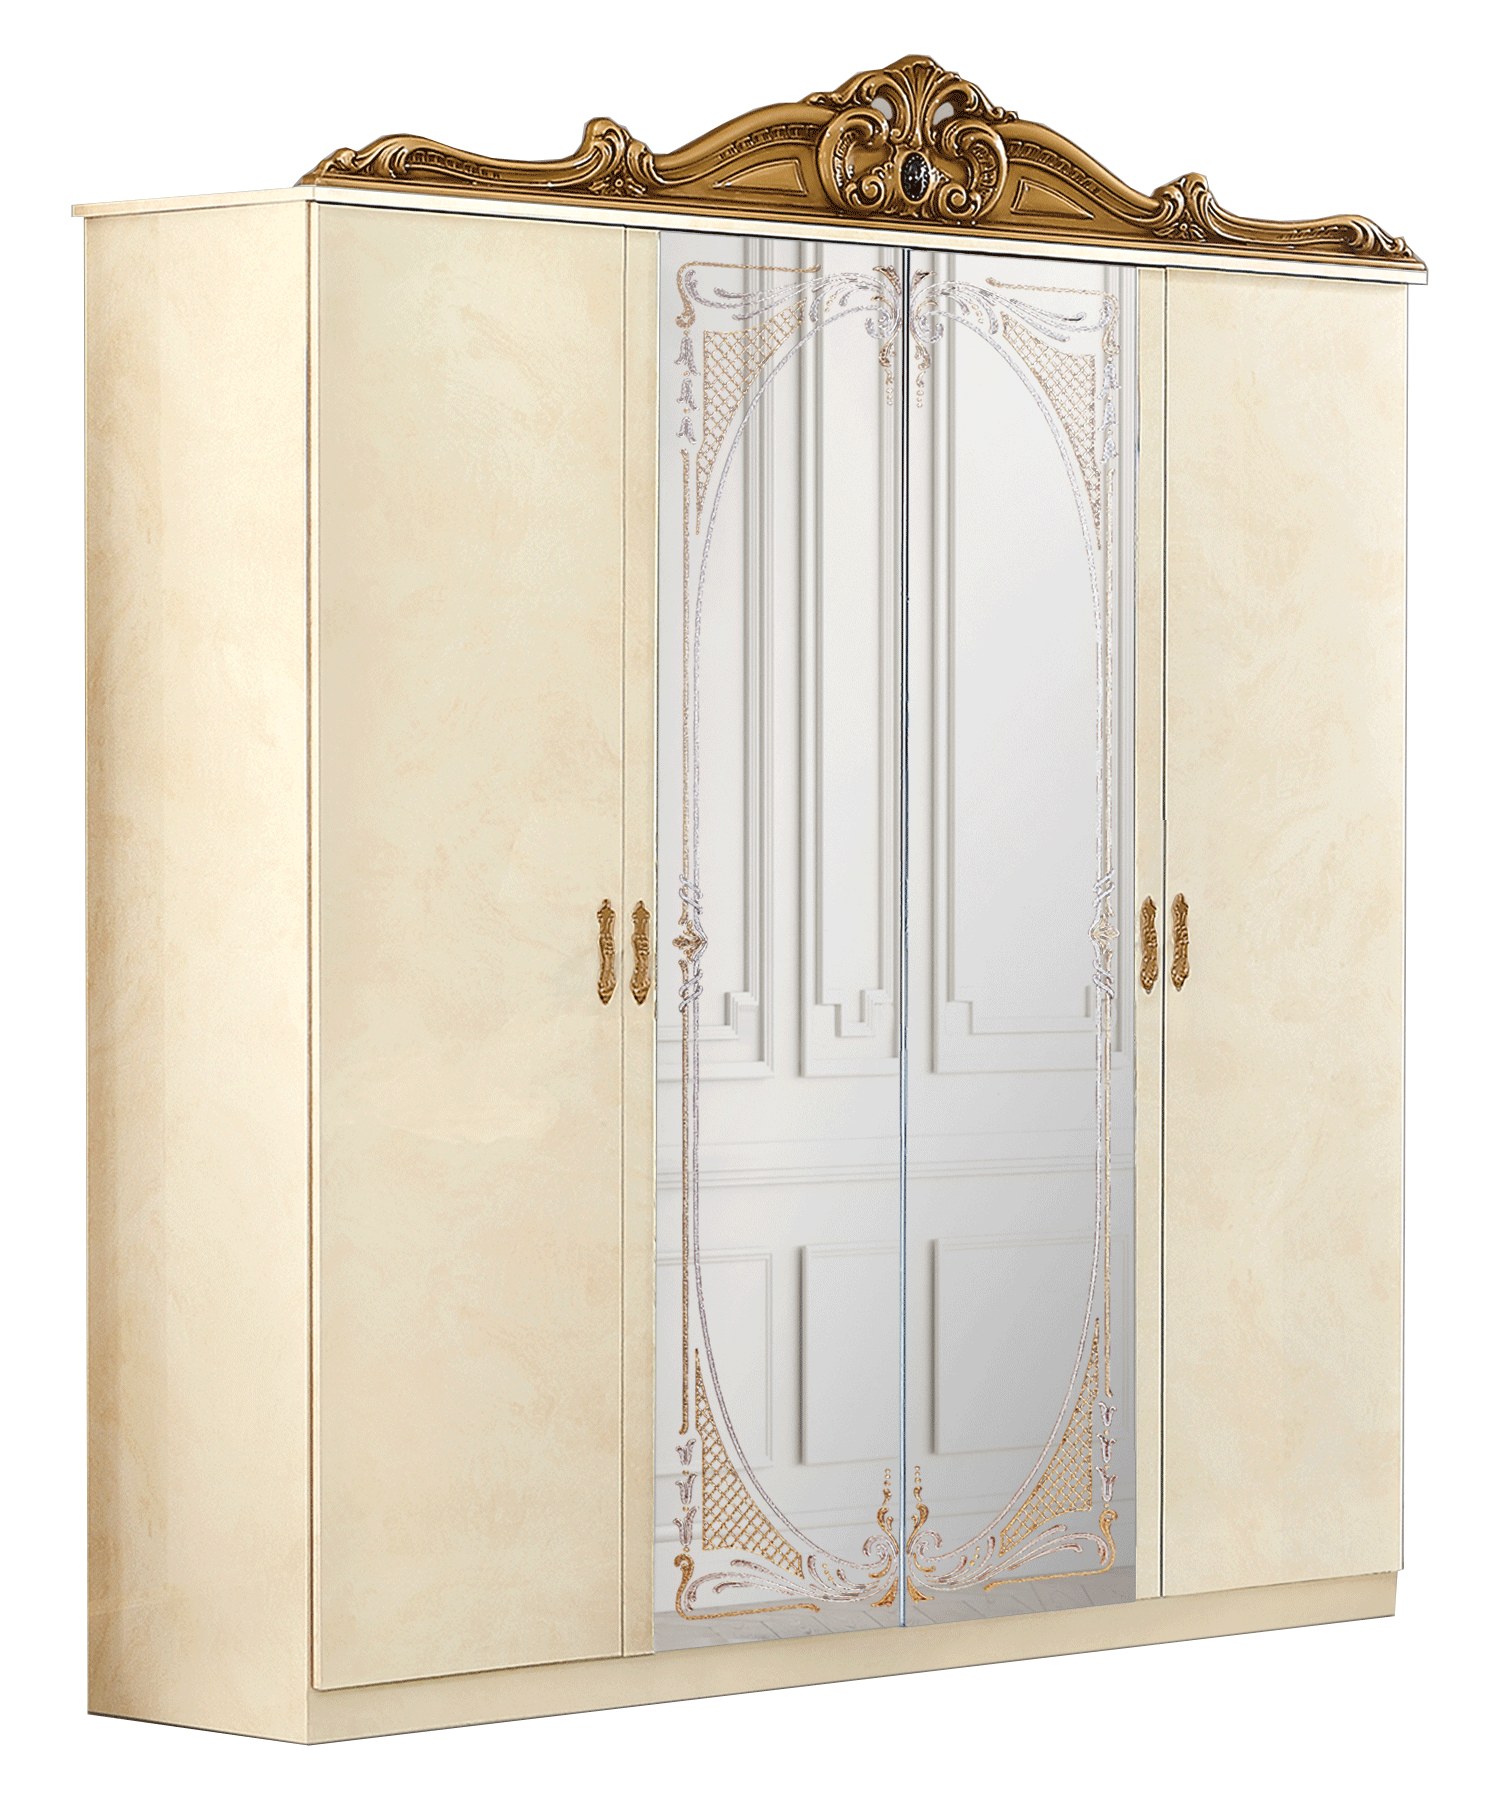 Brands Camel Classic Collection, Italy Barocco Ivory/Gold 4 Door Wardrobe